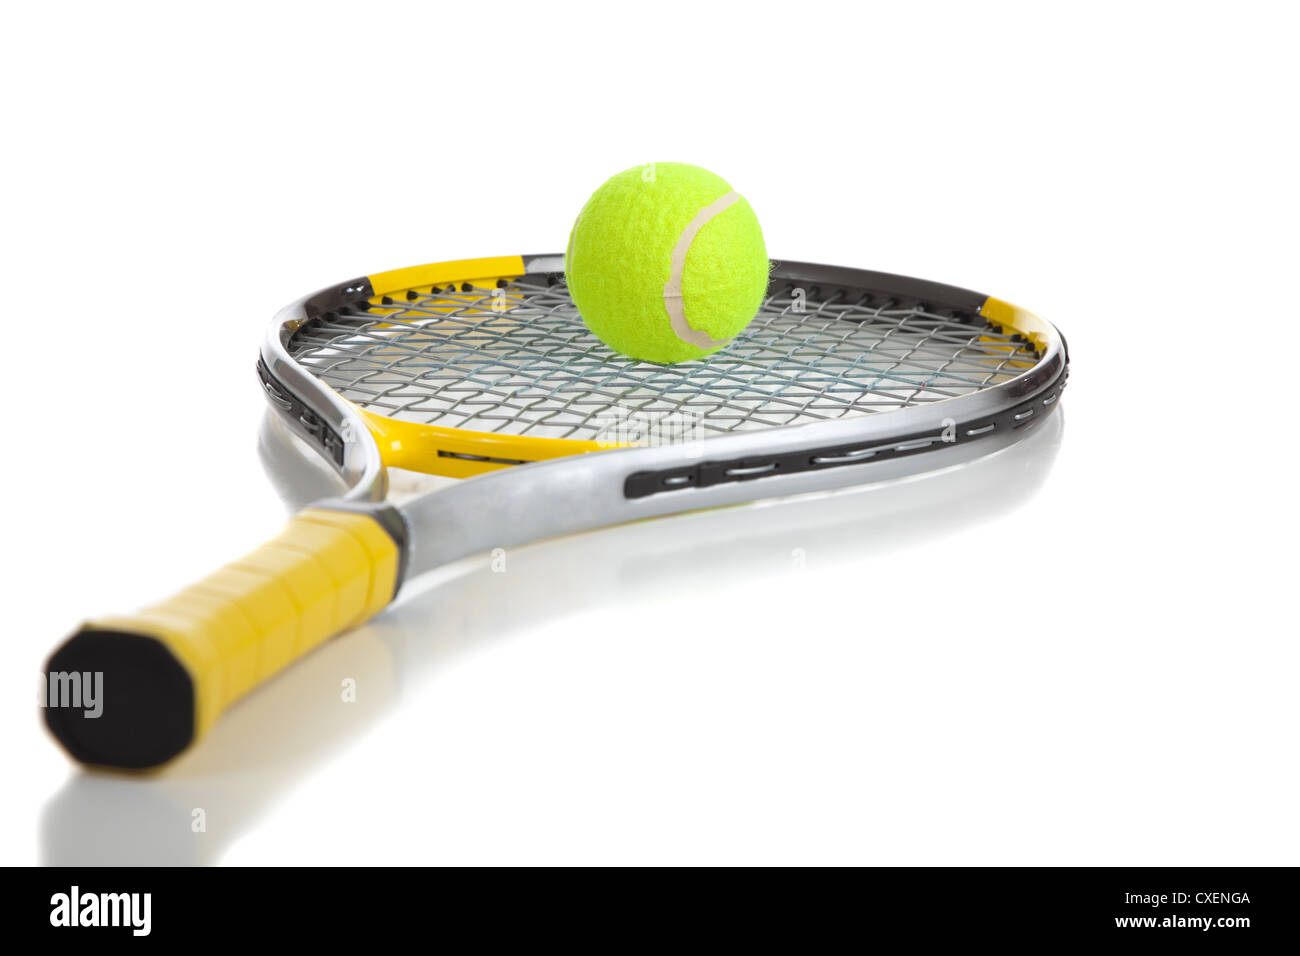 A metal tennis racket and yellow tennis ball on  a white background Stock Photo